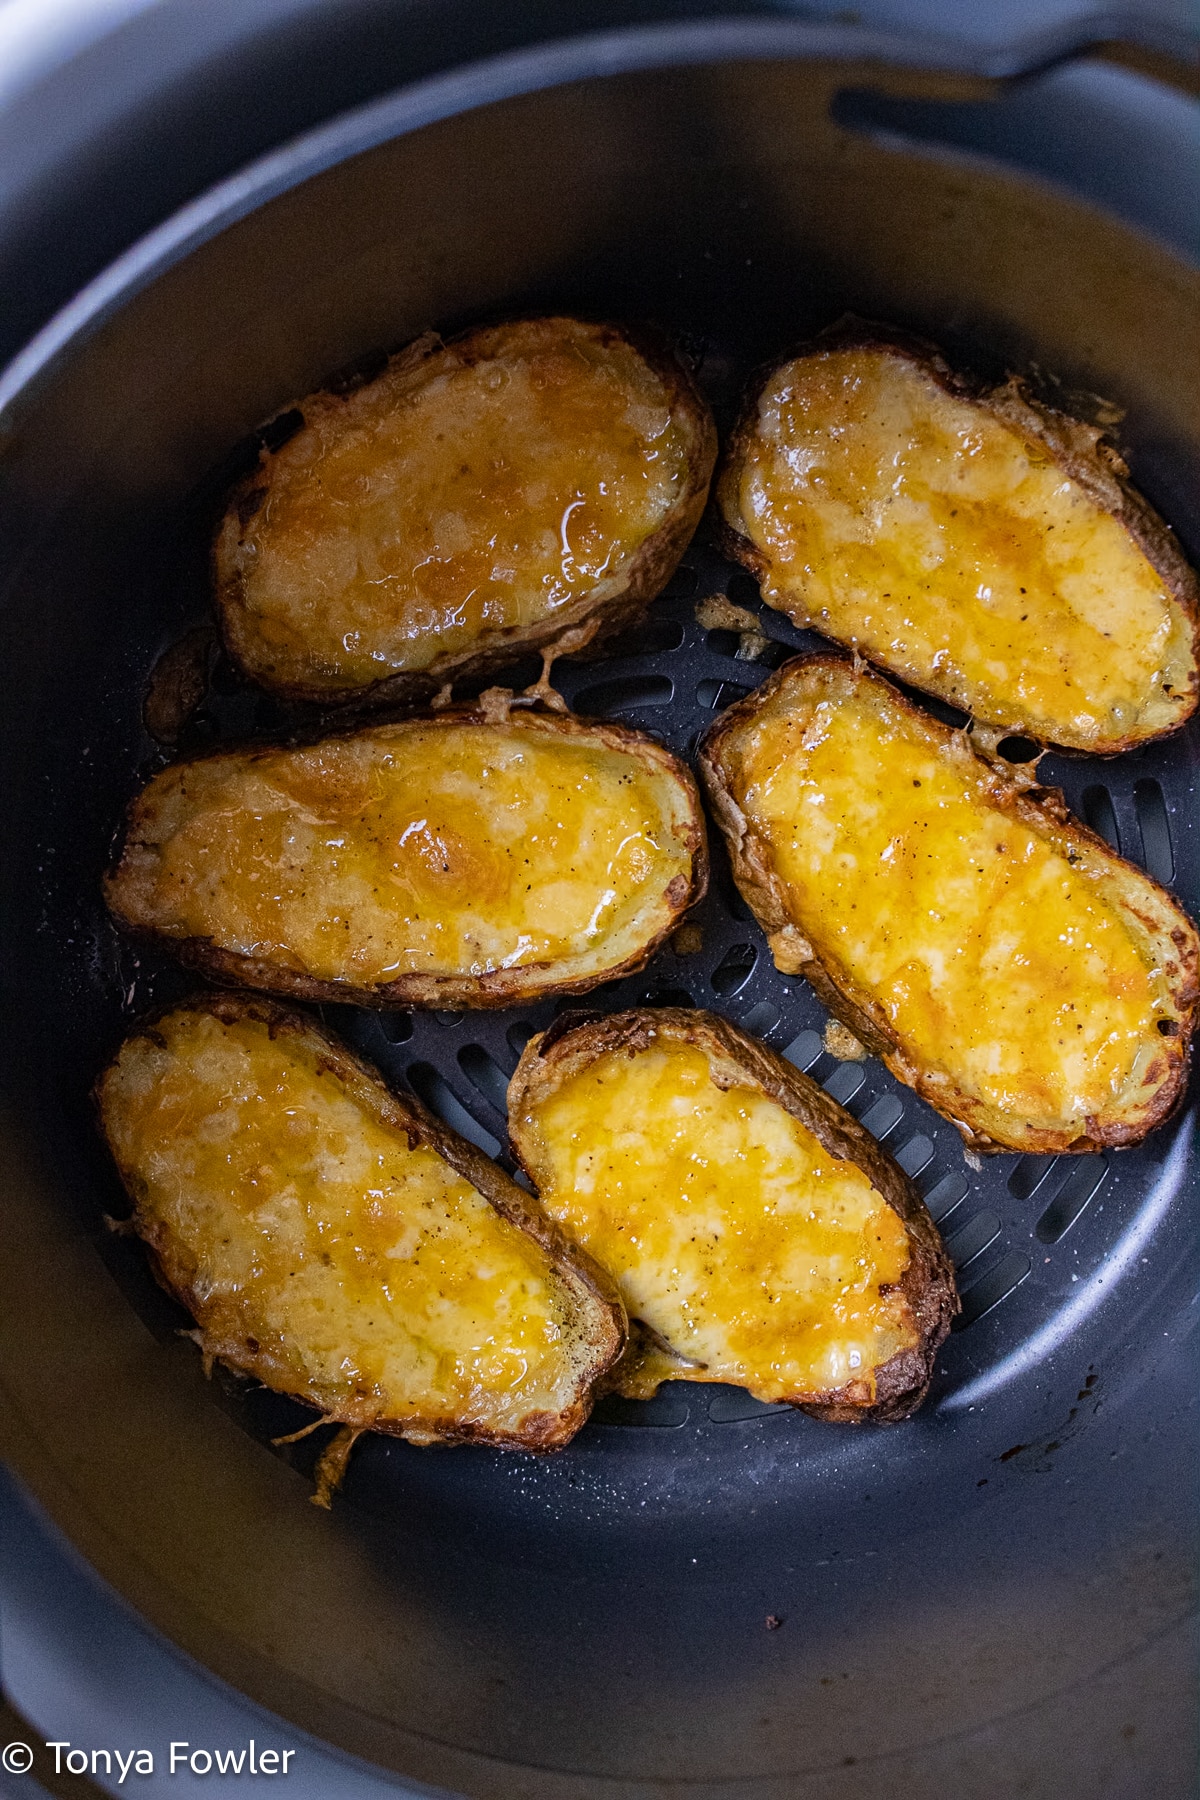 Potato skins with cheese inside in the air fryer.